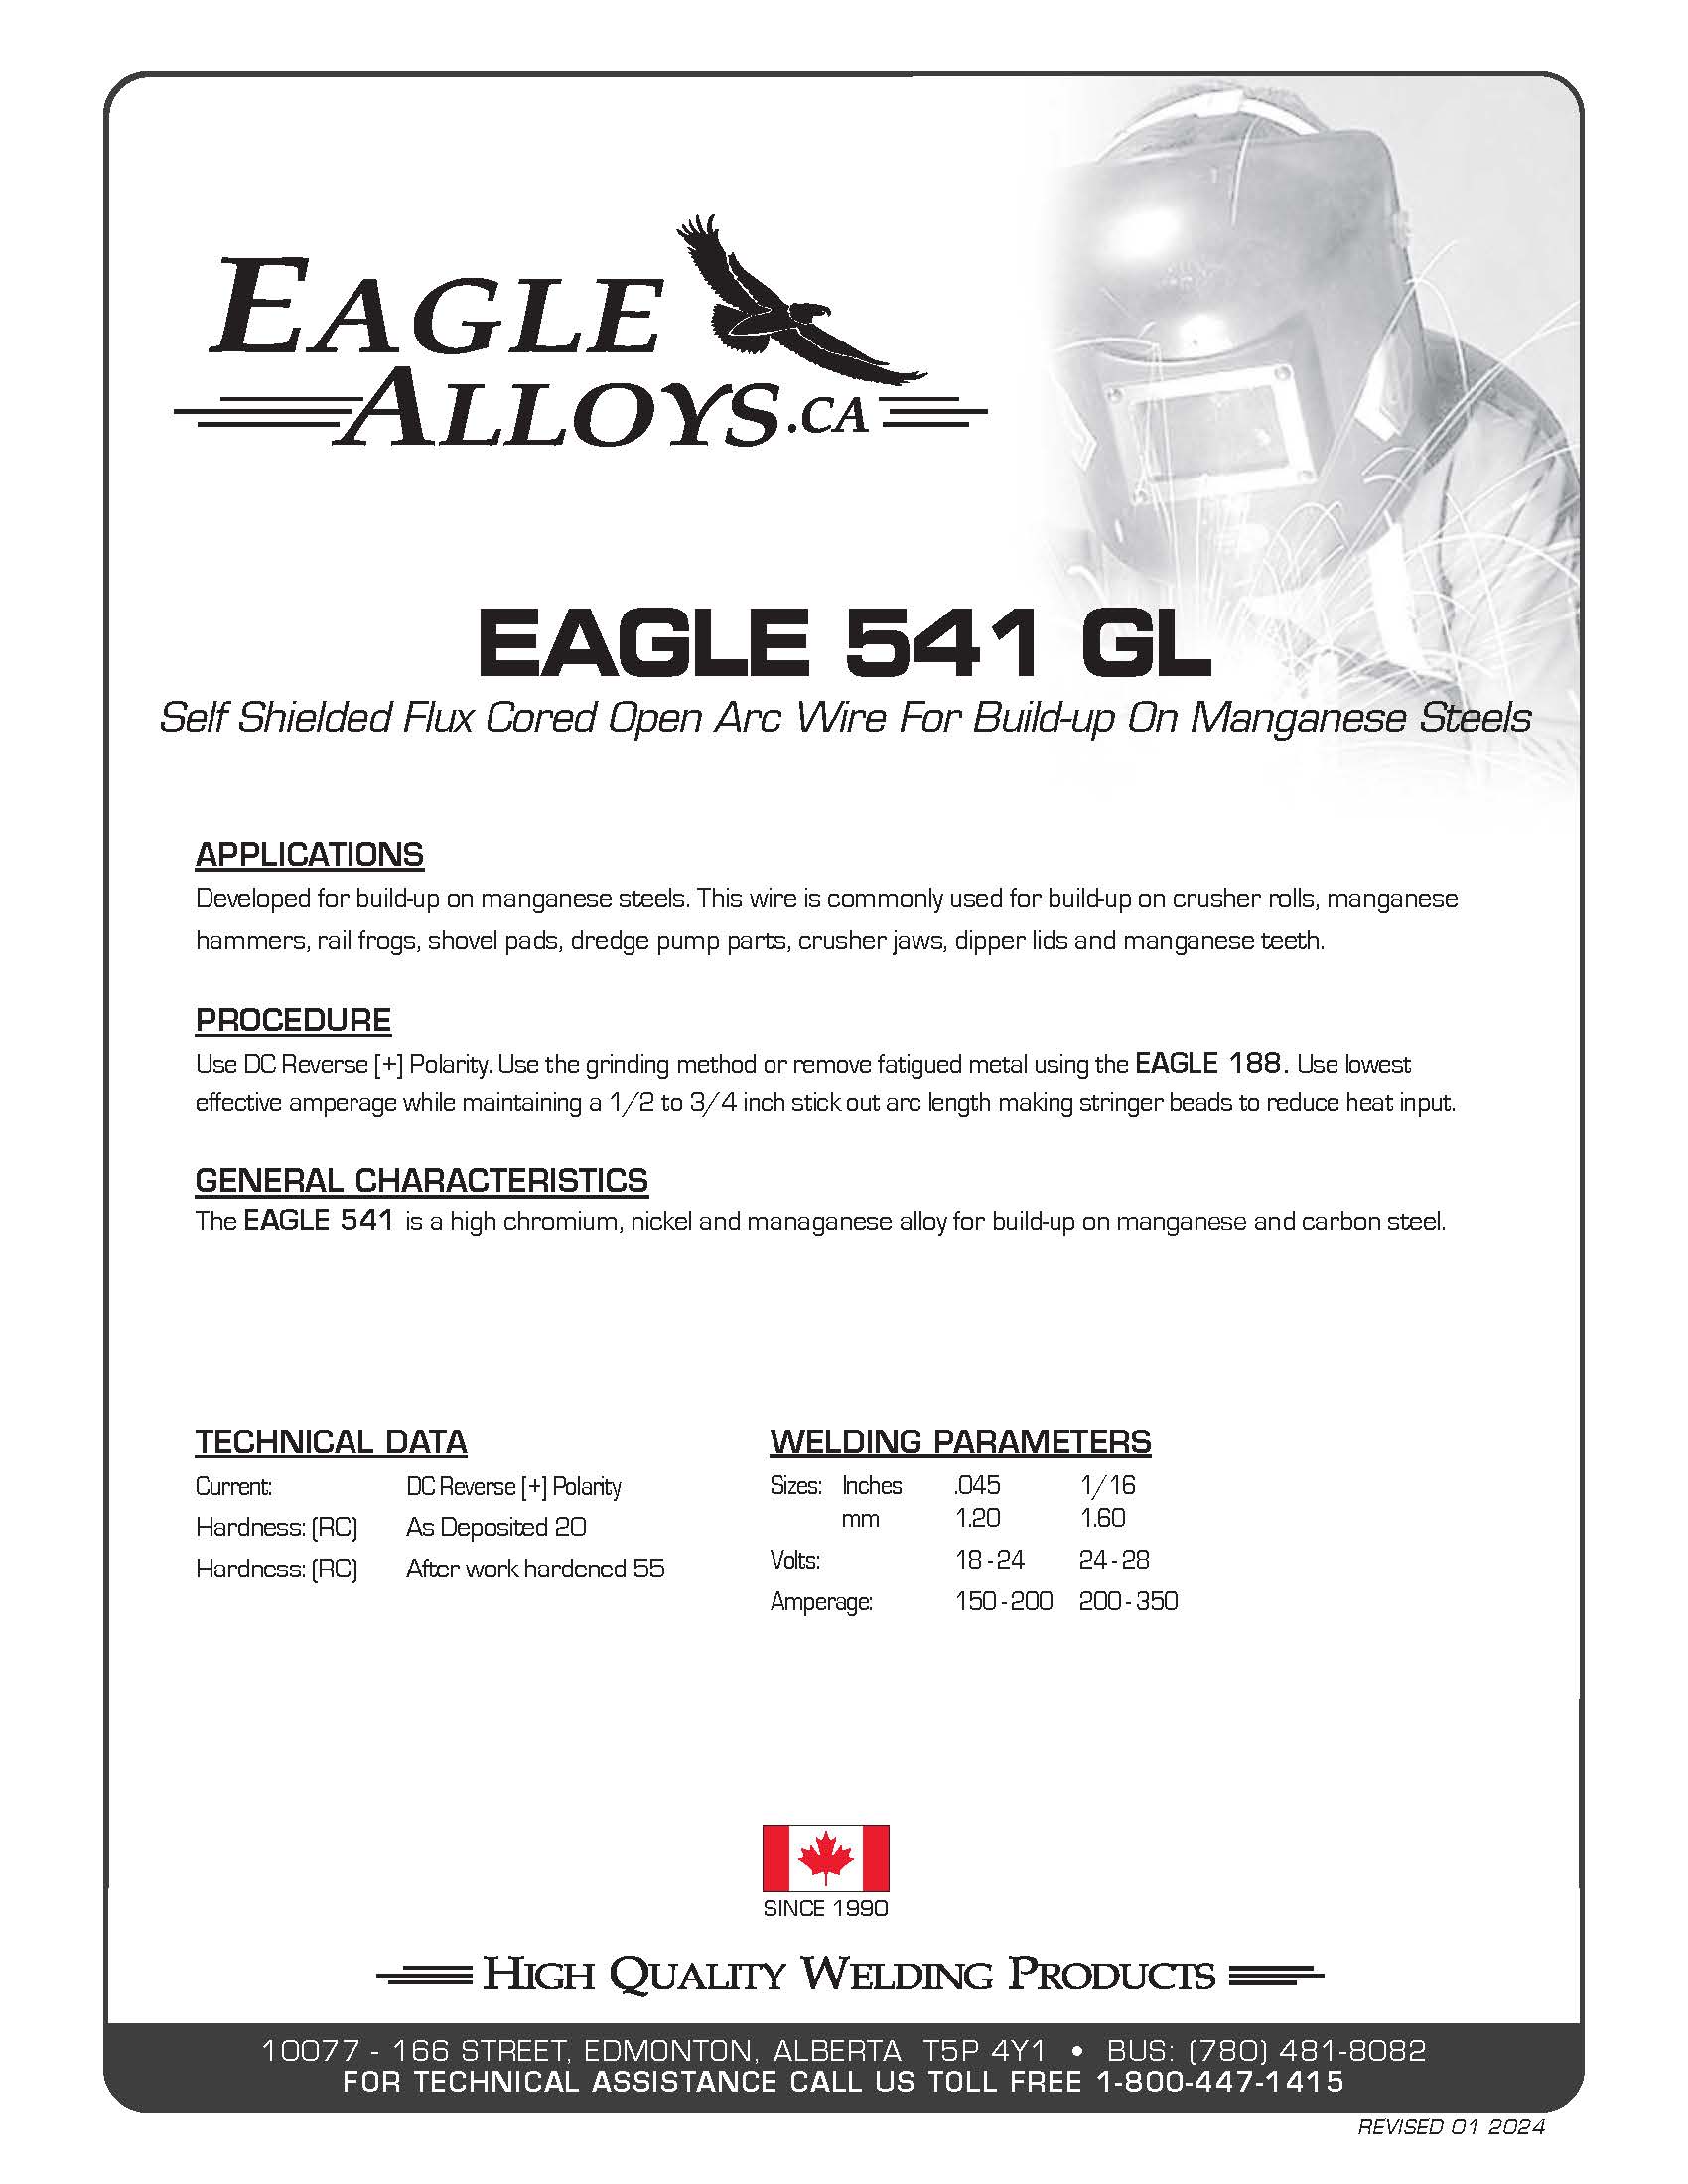 EAGLE 541 GL Self Shielded Flux Cored Open Arc Wire For Build-up On Manganese Steels PDF Spec Sheet